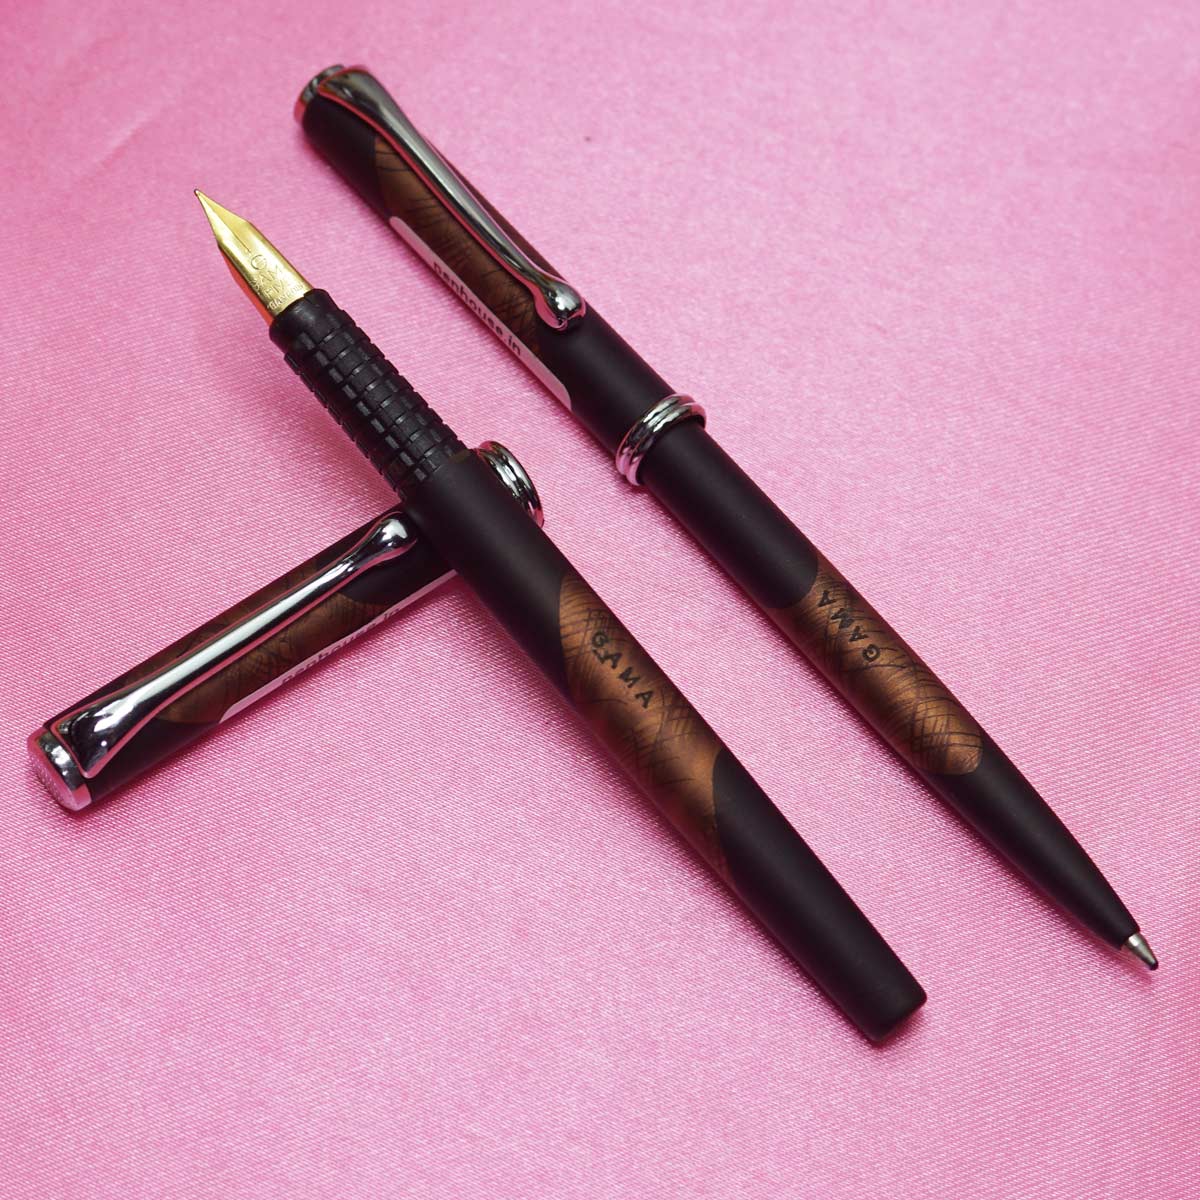 Gama - 21 - Black Color Body and Copper Design Aeromatic Fountain Pen with 5 year Point MB - Gold Plated German Nibs and Ball Pen Set SKU 22203